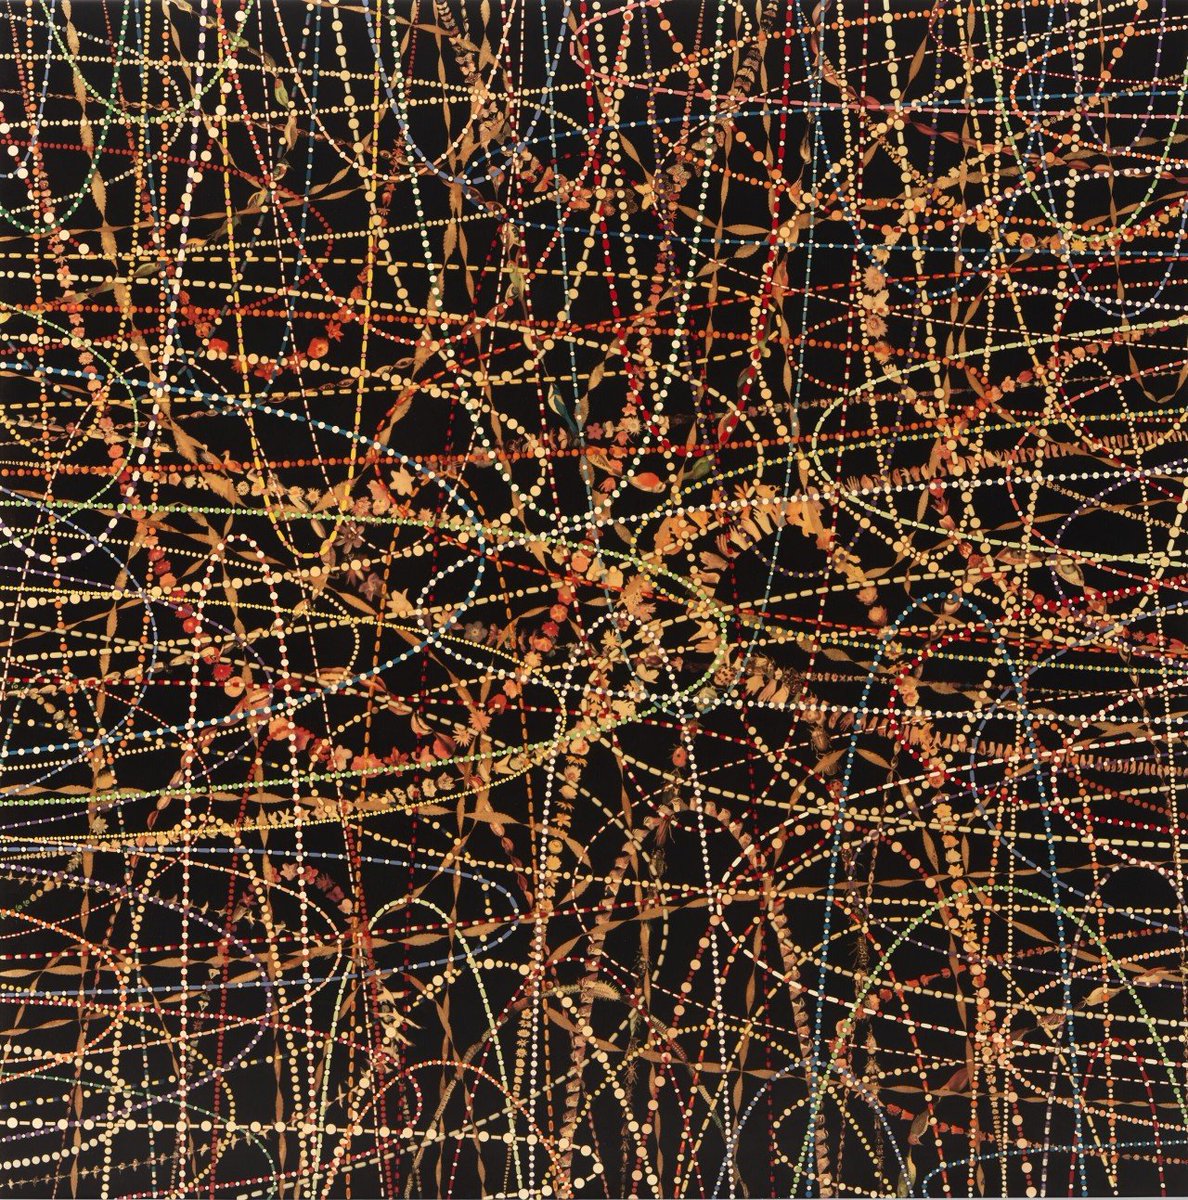 Fred Tomaselli. 'Gravity in Four Directions,' 2001.